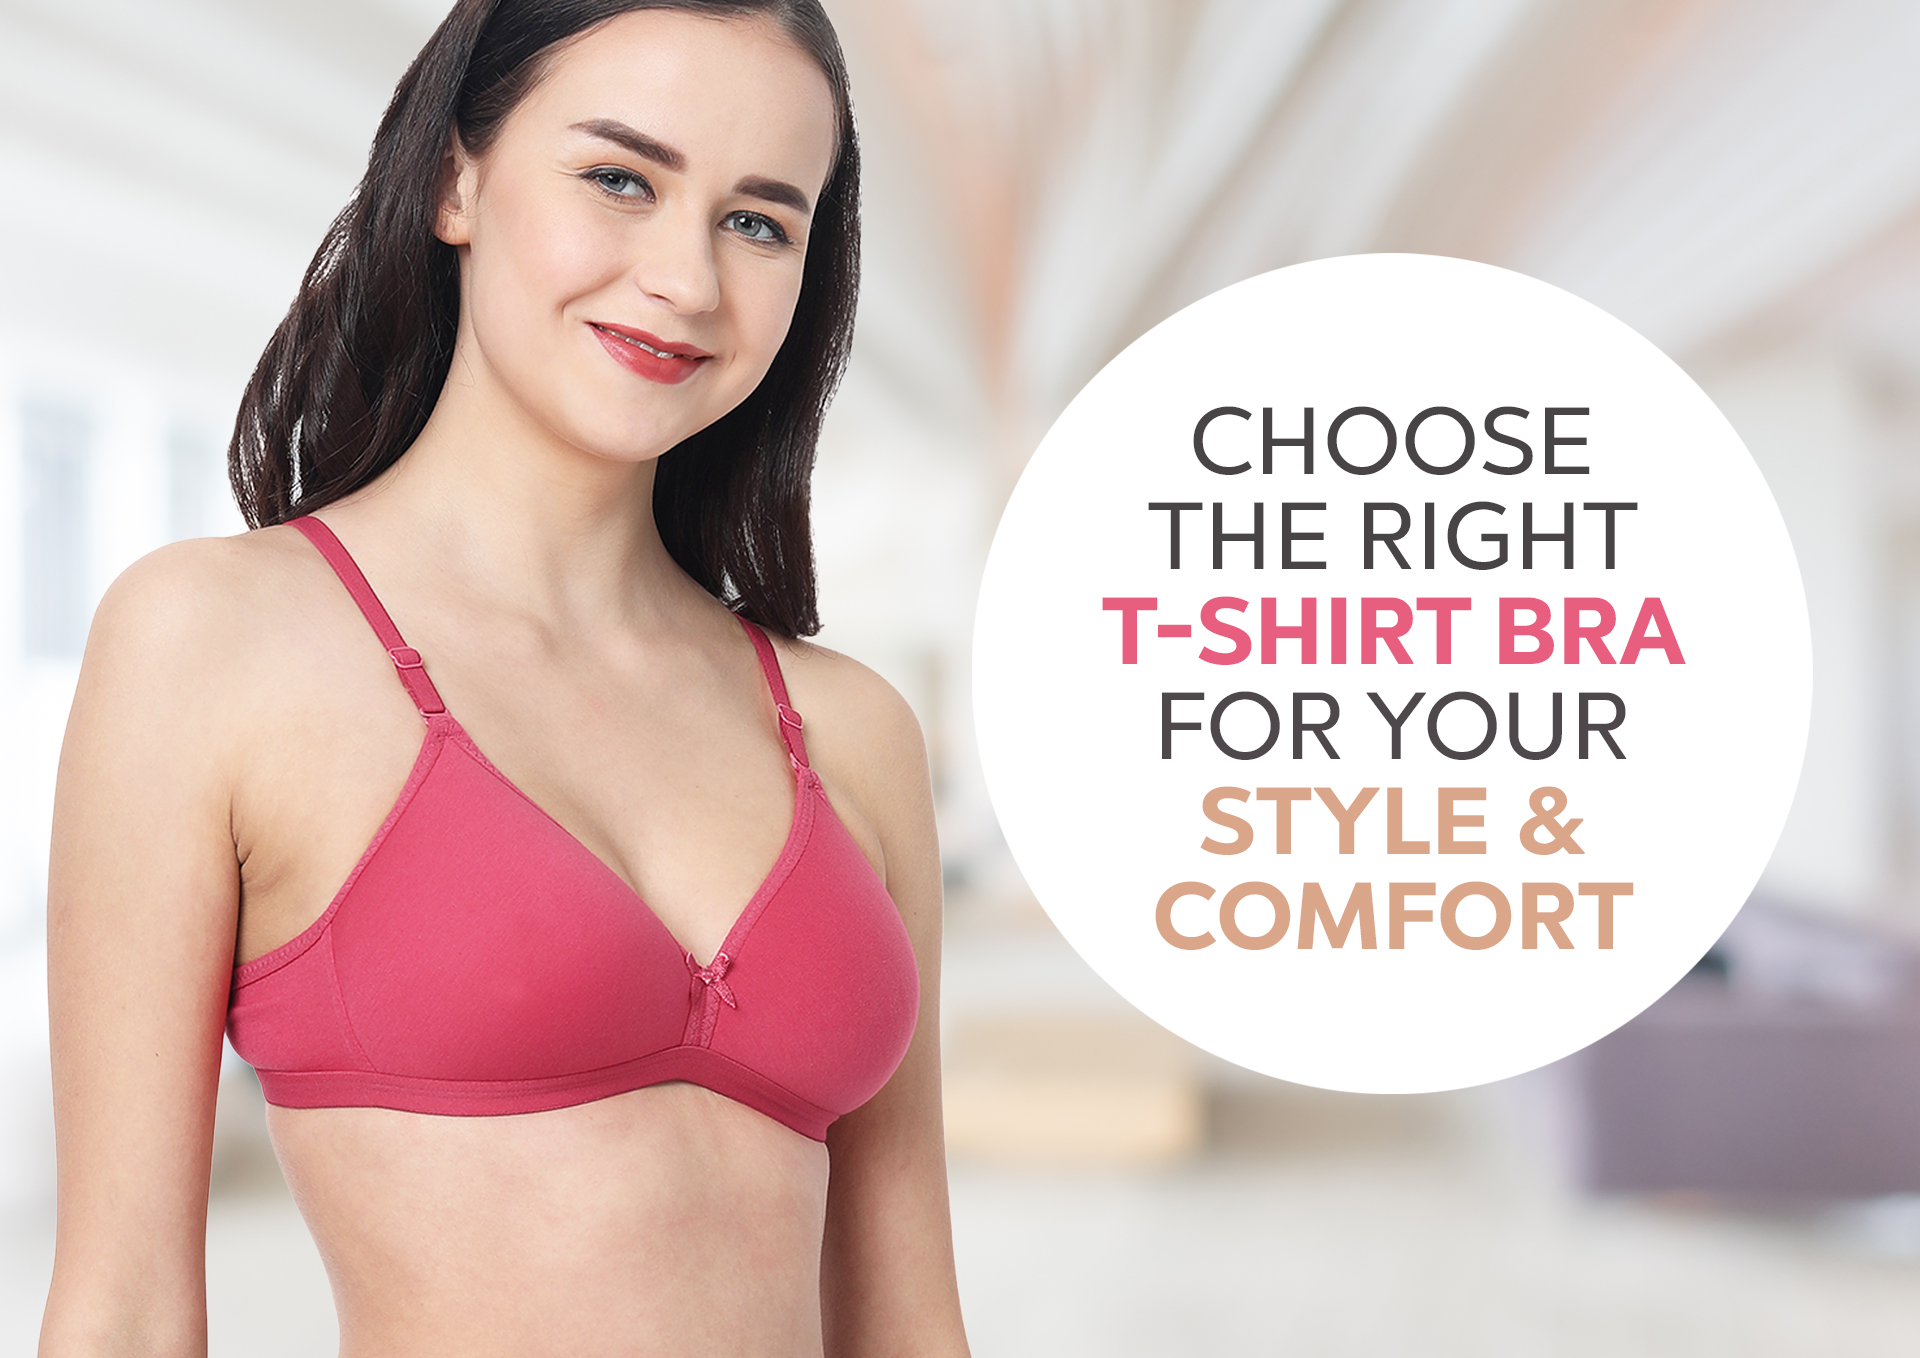 Seamless bras / t-shirt bra are typically designed to provide the